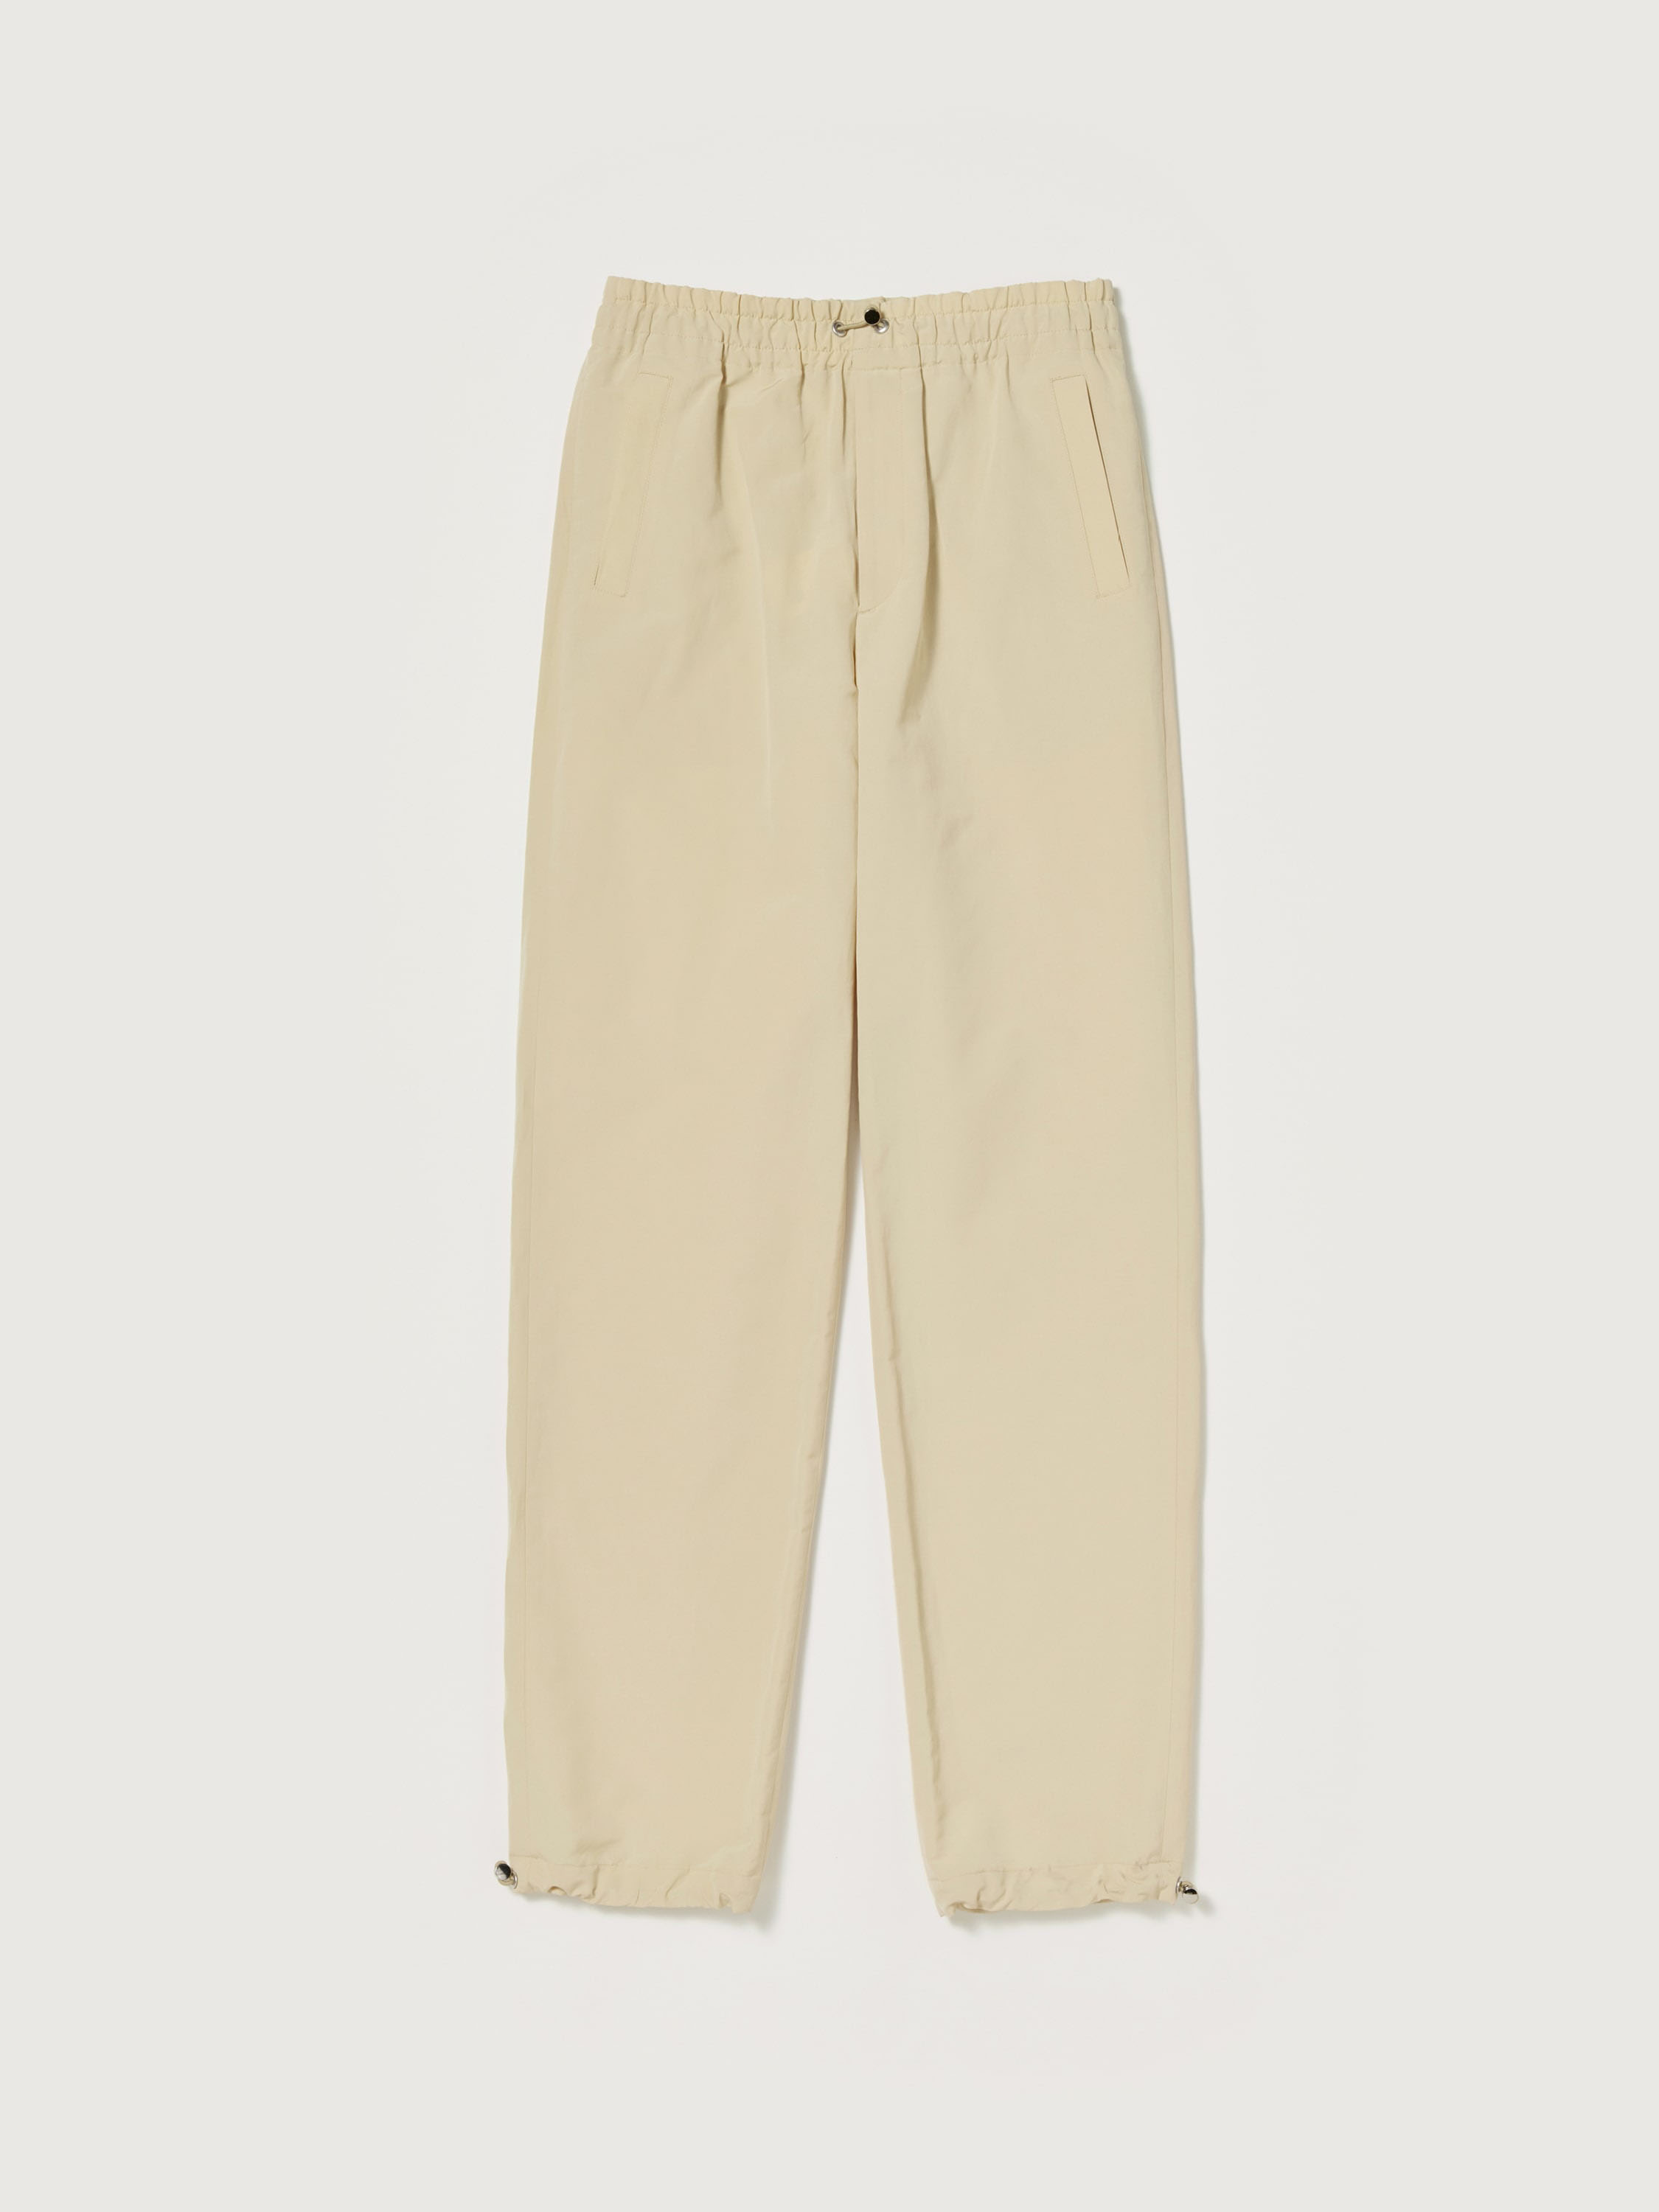 WASHI POLYESTER HIGH DENSITY CLOTH EASY PANTS 詳細画像 IVORY BEIGE 1